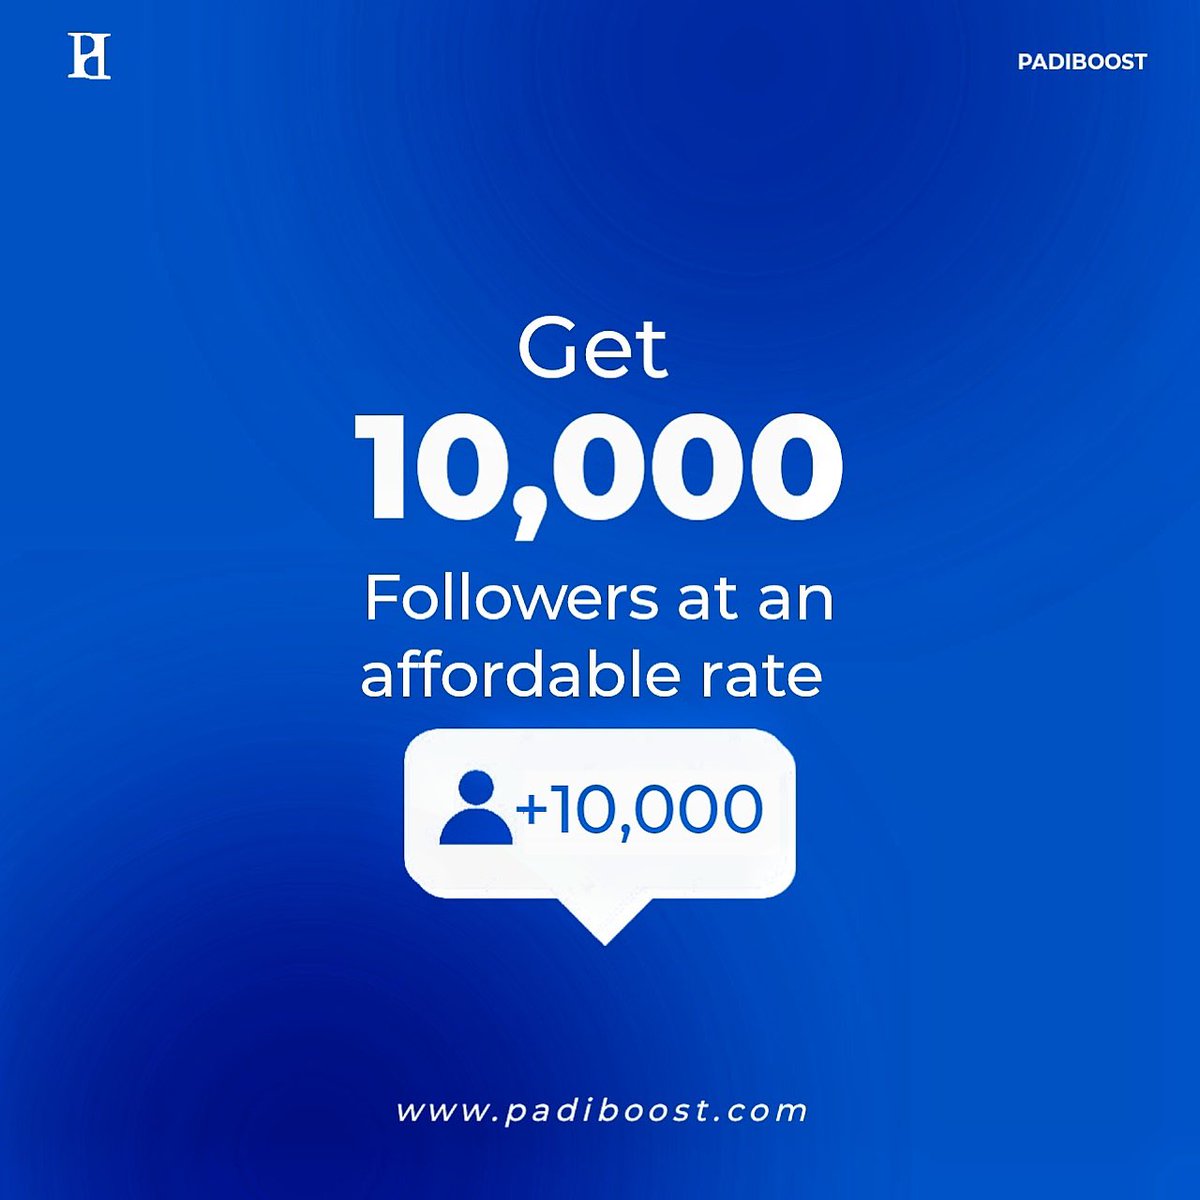 Did you know that the more followers you have, the more trustworthy your business is. Log on to padiboost.com to explore the variety of our services!